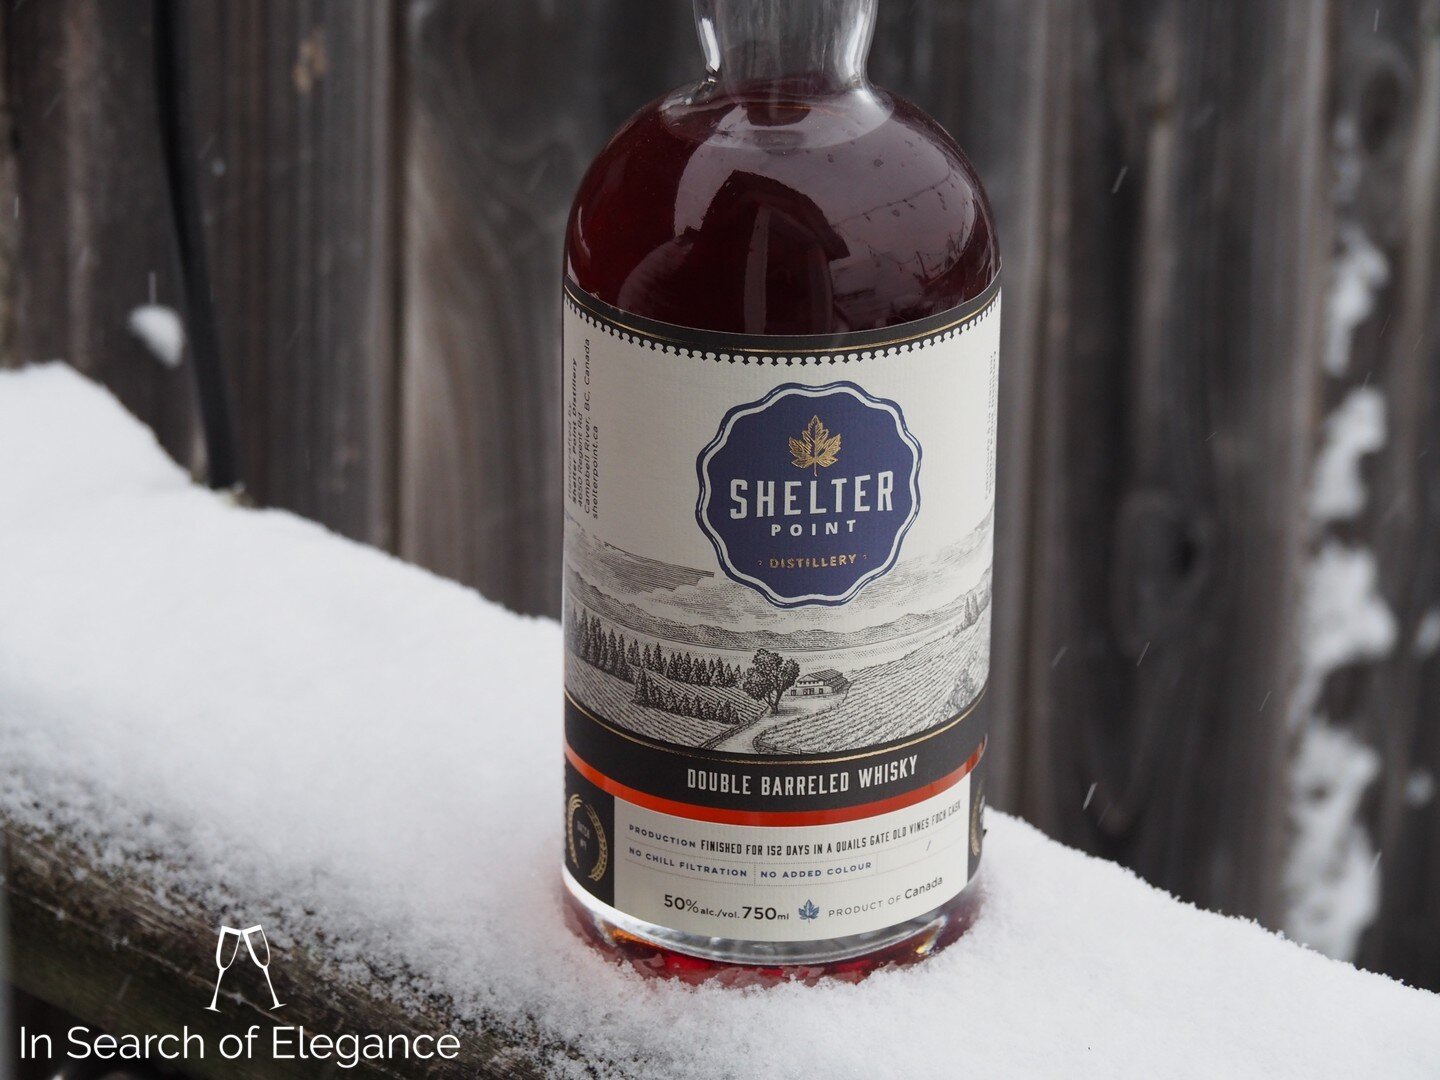 Image courtesy of Shelter Point Distillery.